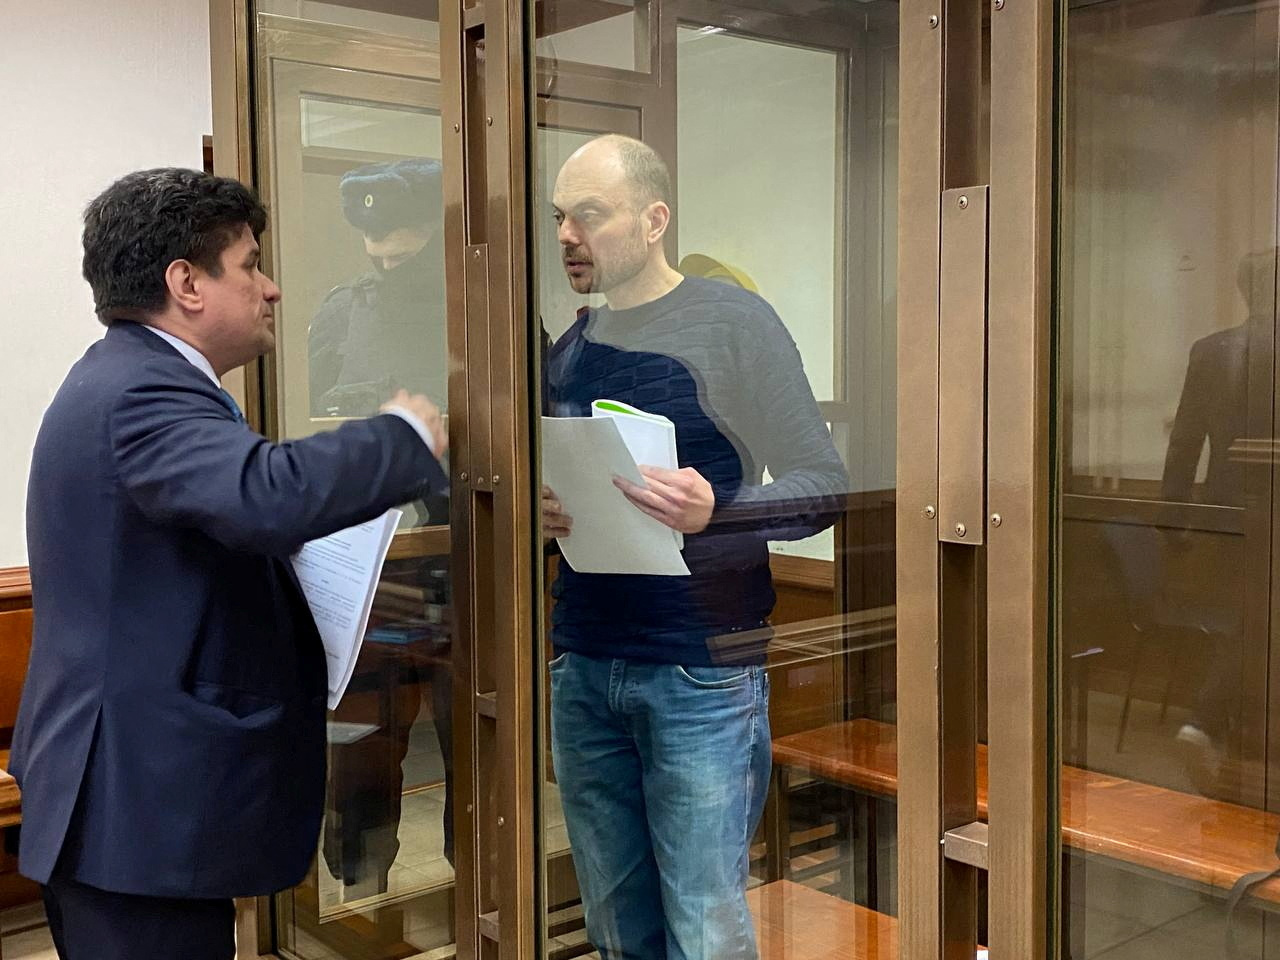 Vladimir Kara-Murza, talks to his lawyer Vadim Prokhorov during a preliminary court hearing in Moscow, Russia on Monday.